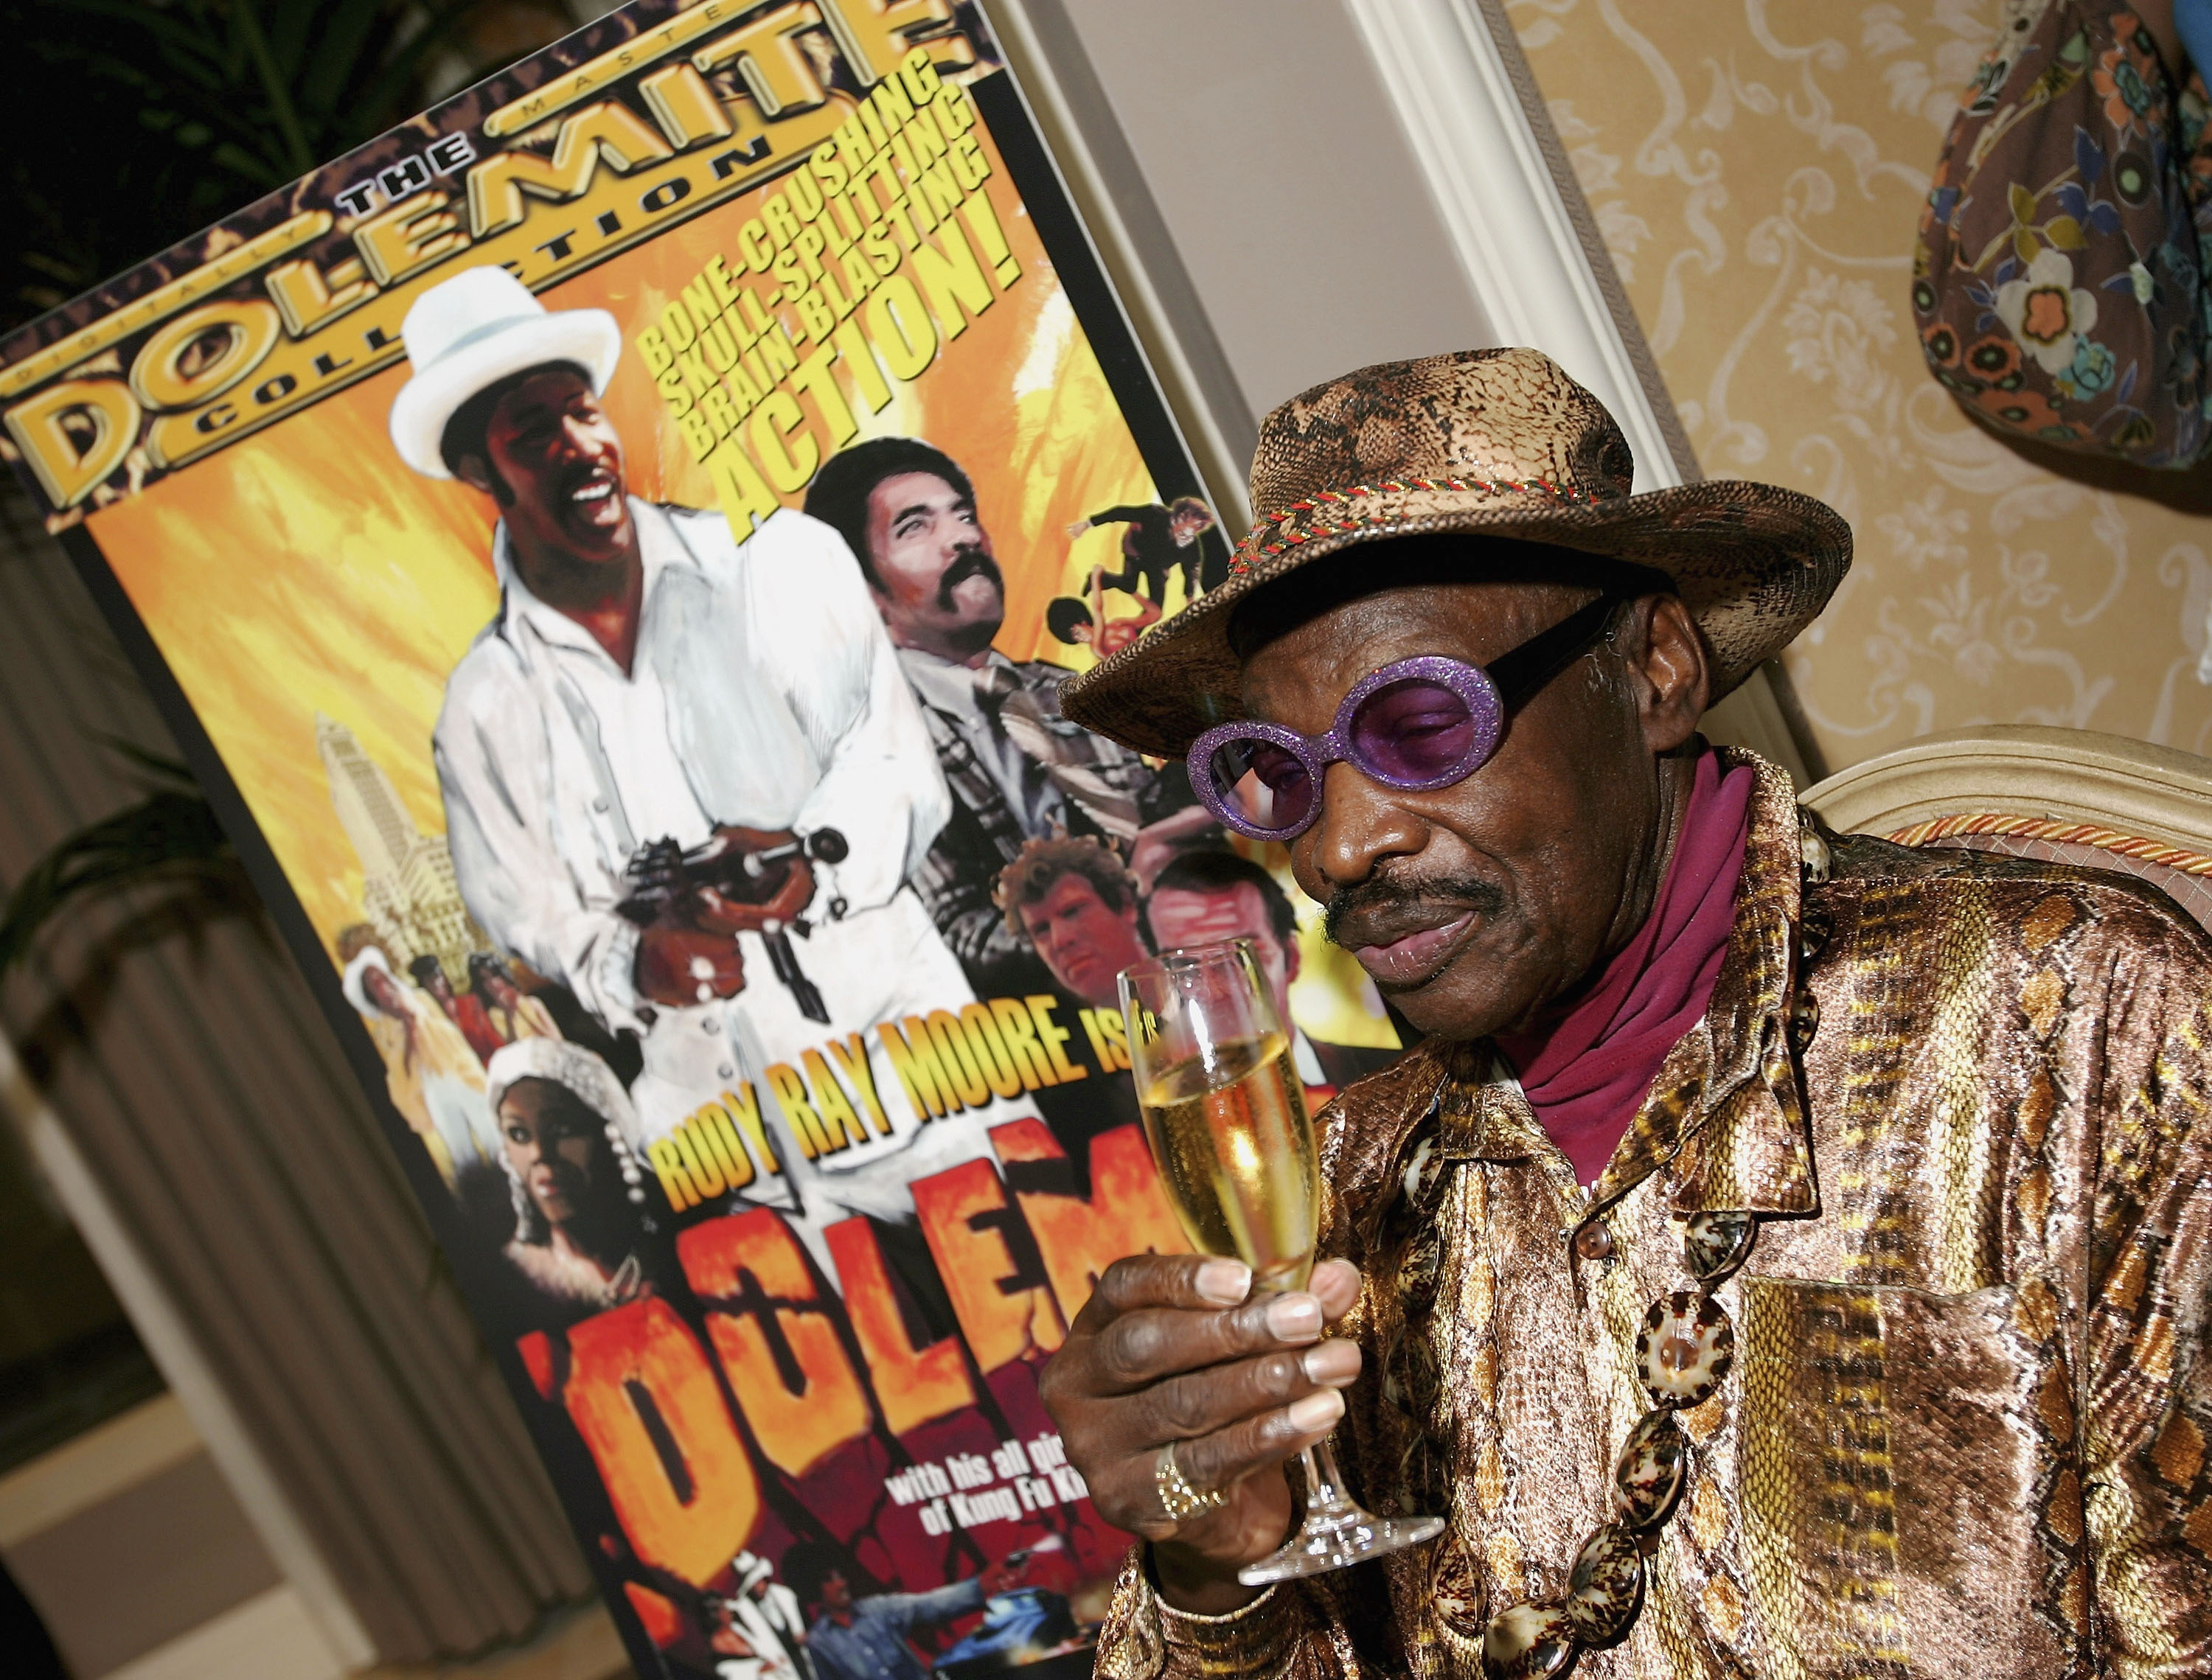 Rudy Ray Moore in 2005. (Ethan Miller&mdash;Getty Images)